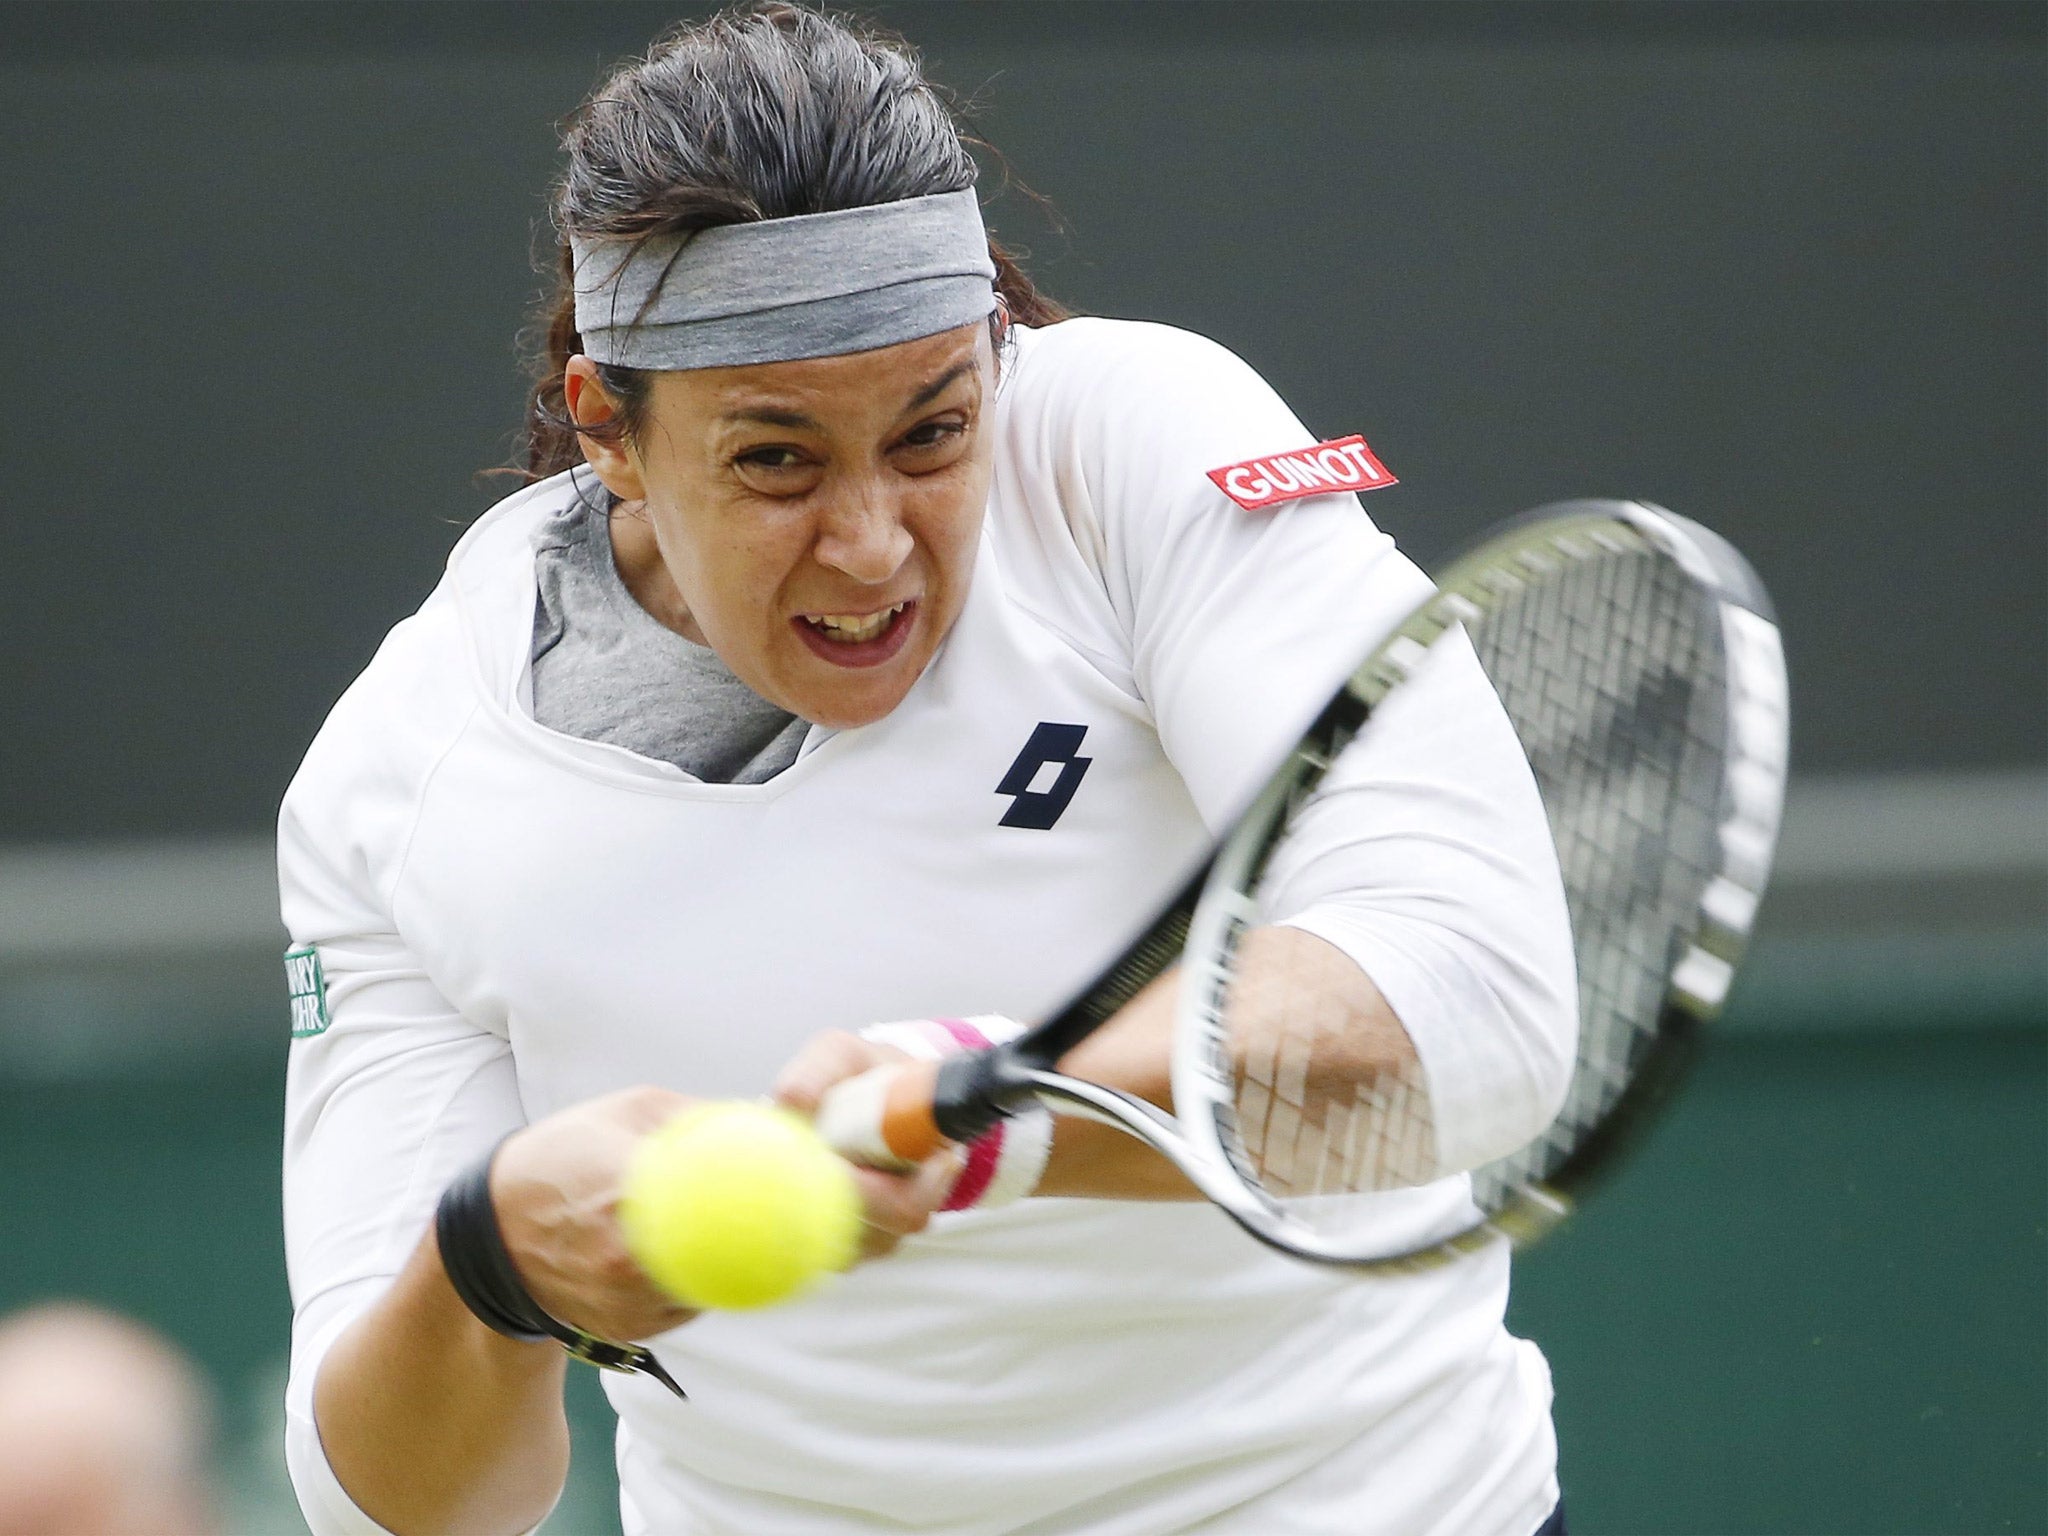 Marion Bartoli has taken a most unlikely route to success